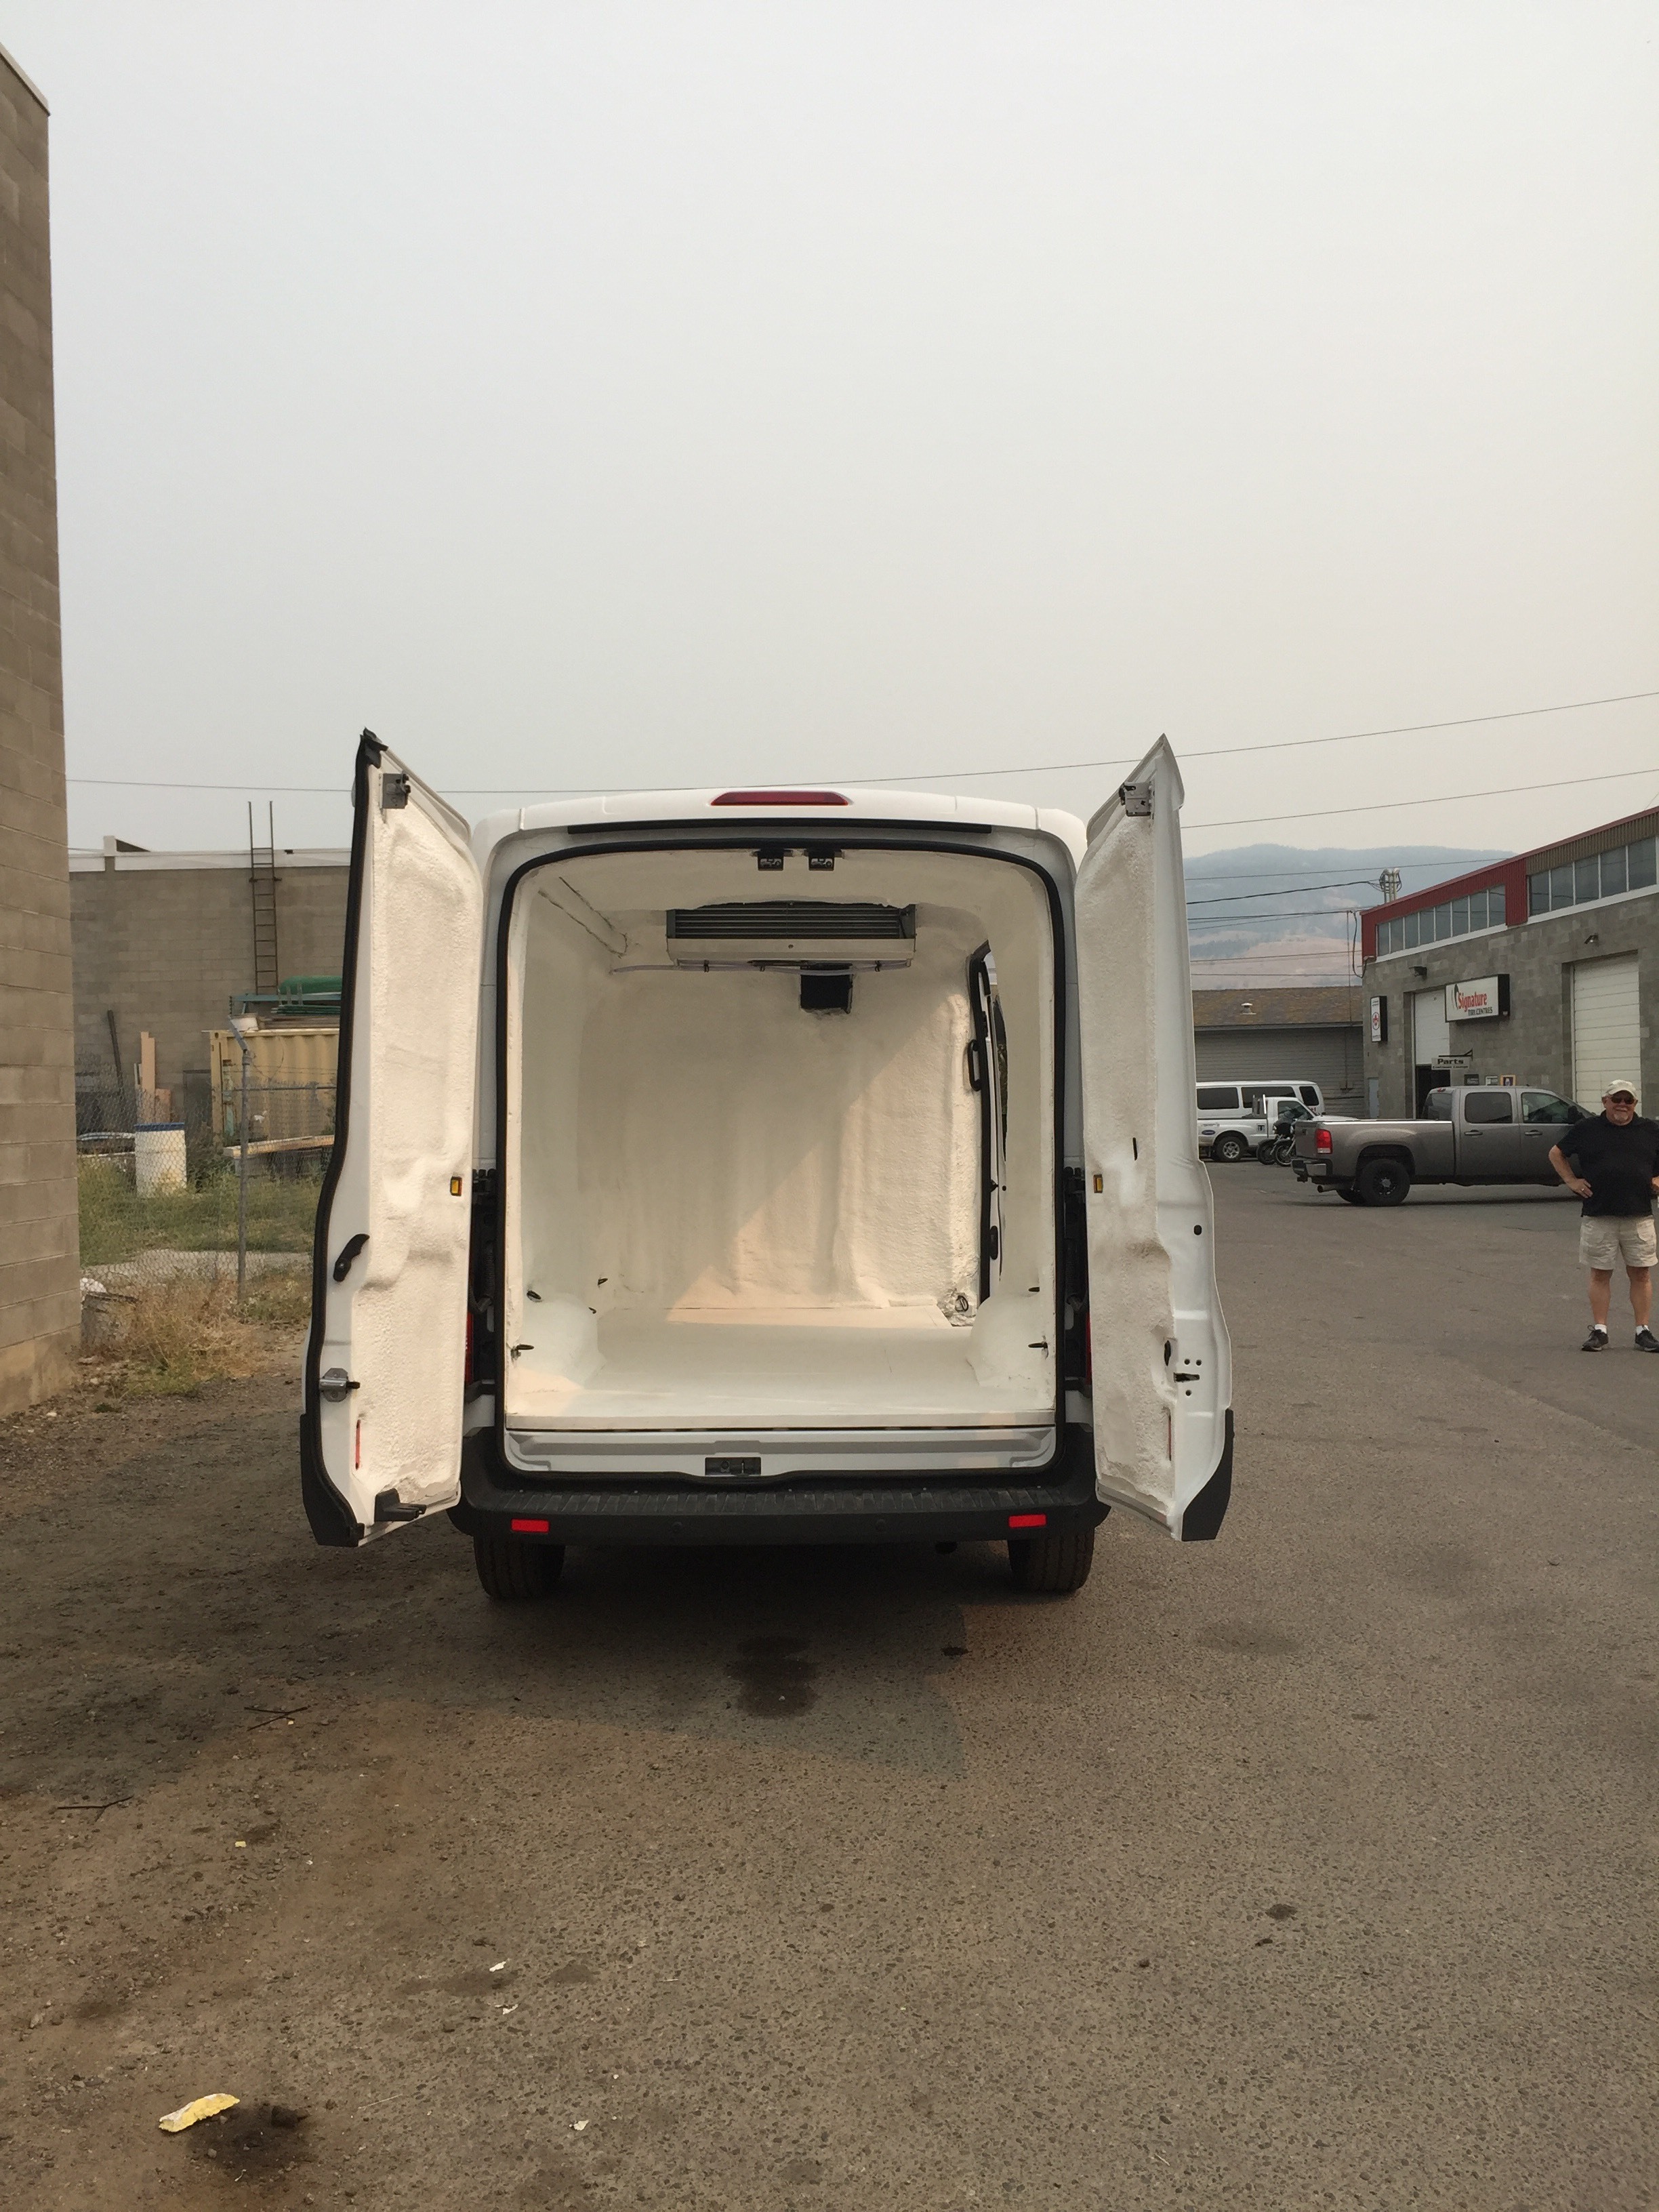 2017 Ford Transit Van Carrier reefer install and insulate.